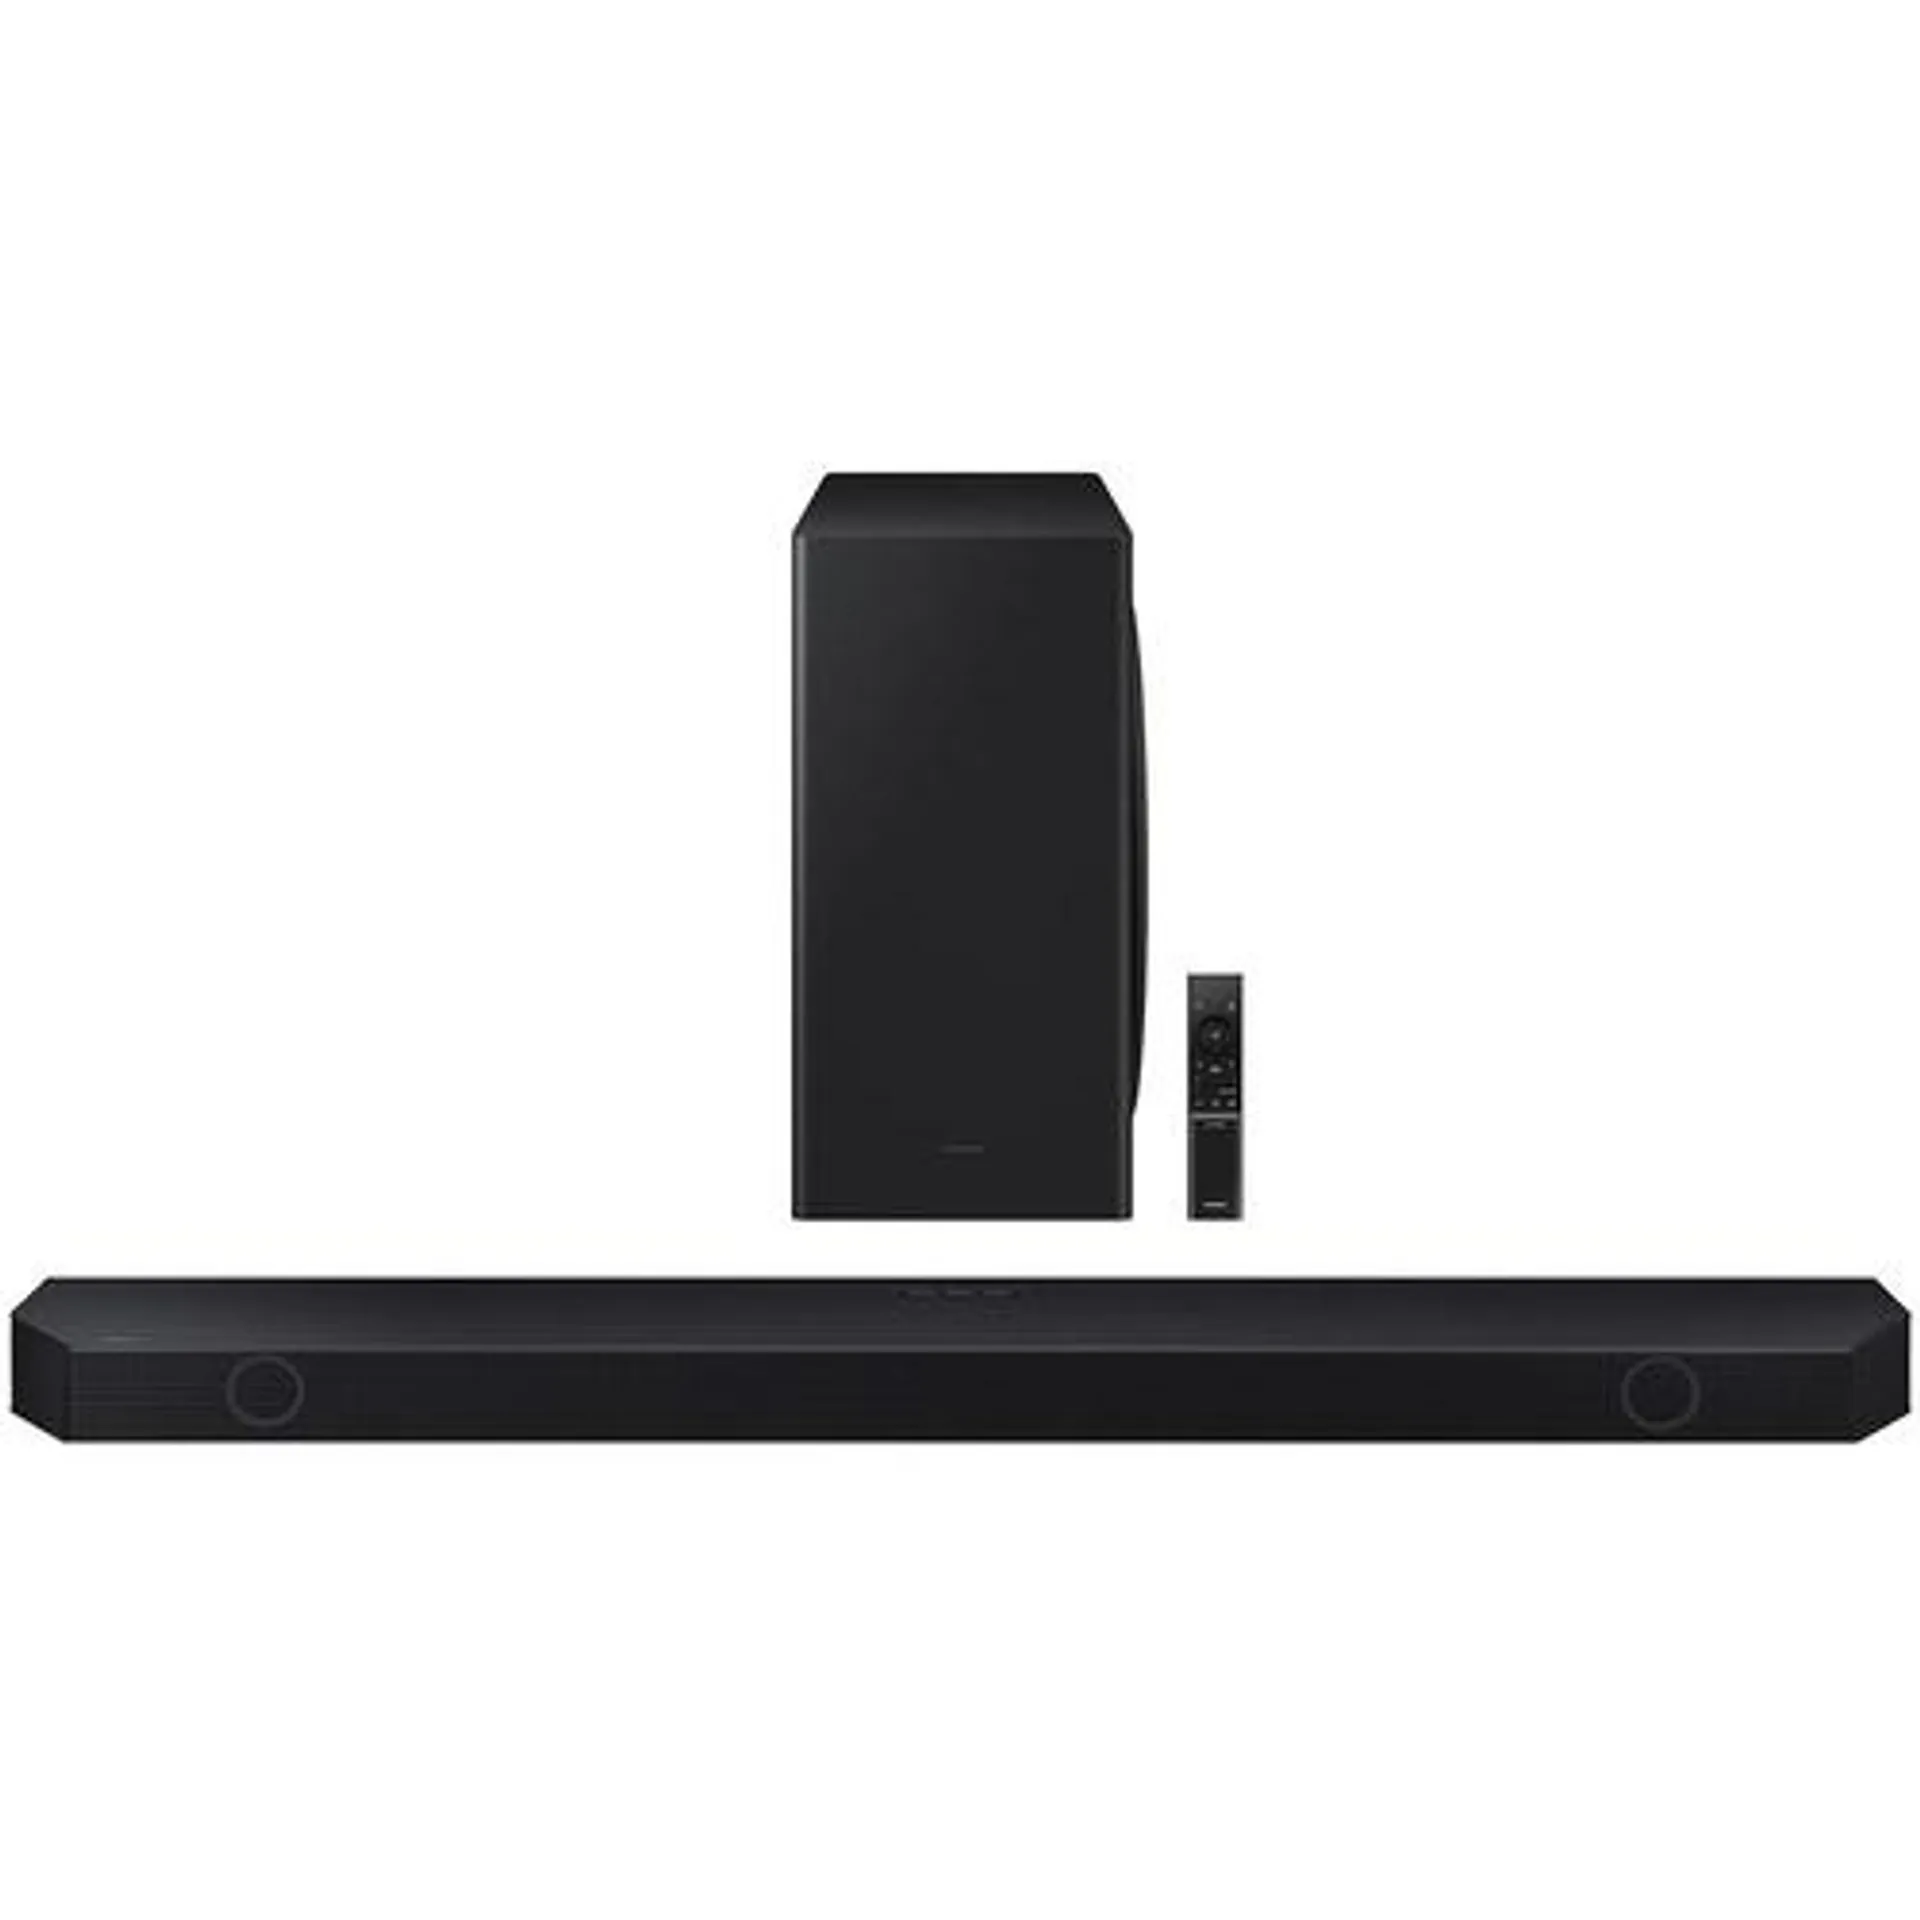 5.1.2 Channel Home Theater Soundbar with Wireless Subwoofer and Dolby Atmos Sound